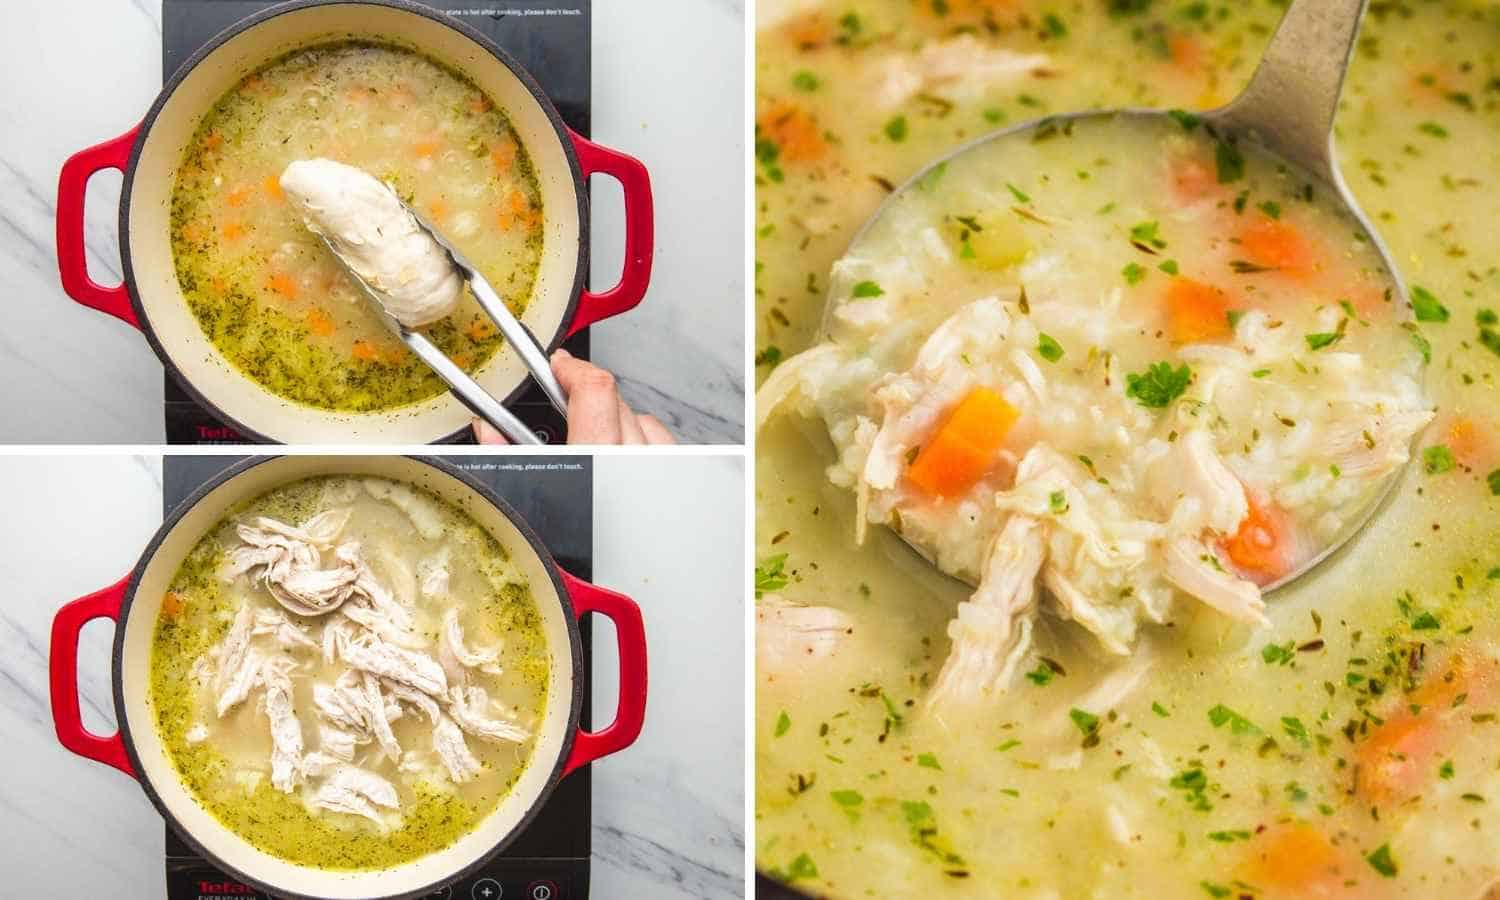 Collage of three images showing how to remove chicken from the soup, shred it, and put it back in the soup.